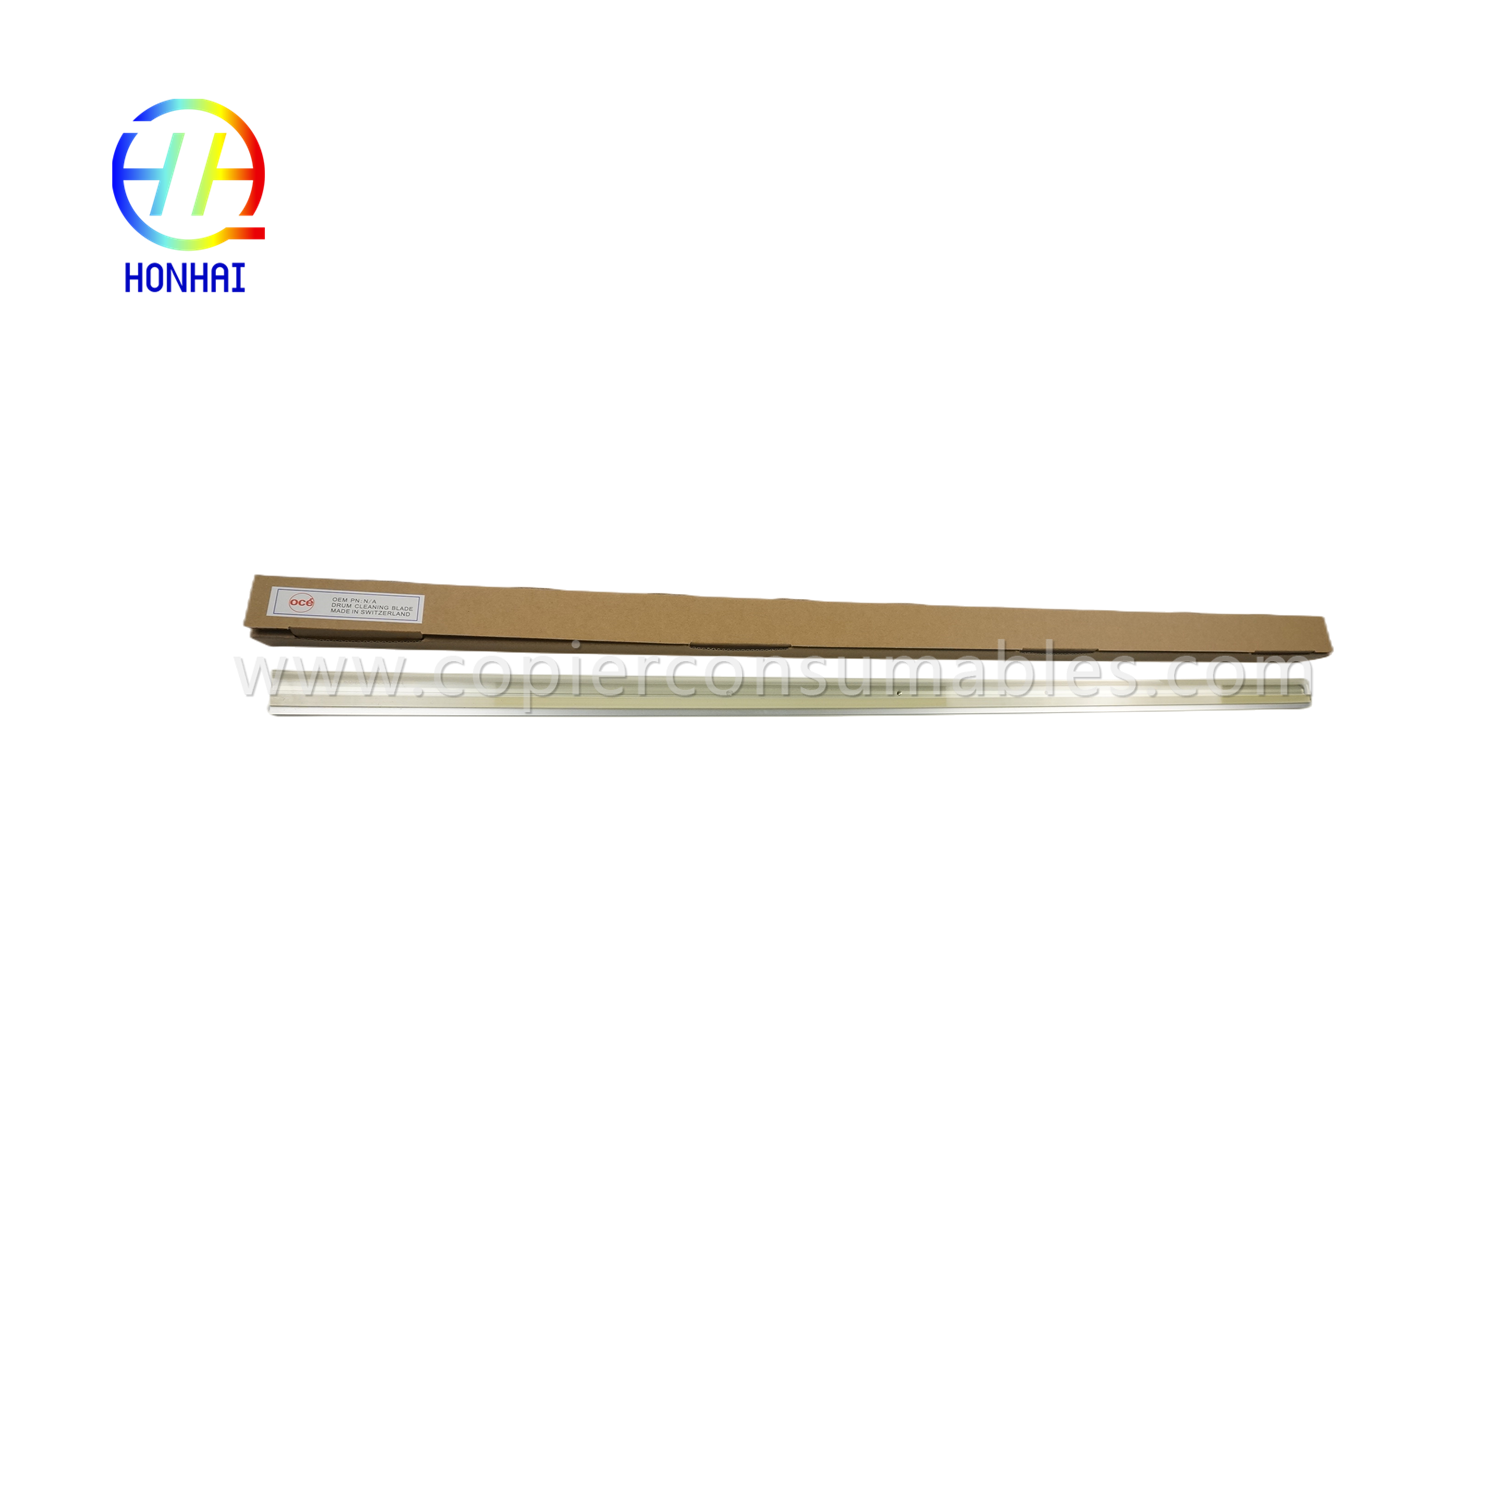 Cleaning Blade for Oce 9300 9400 9600 TDS300 400 600 700 Pw300 340 360 365 (PN. 2912651)